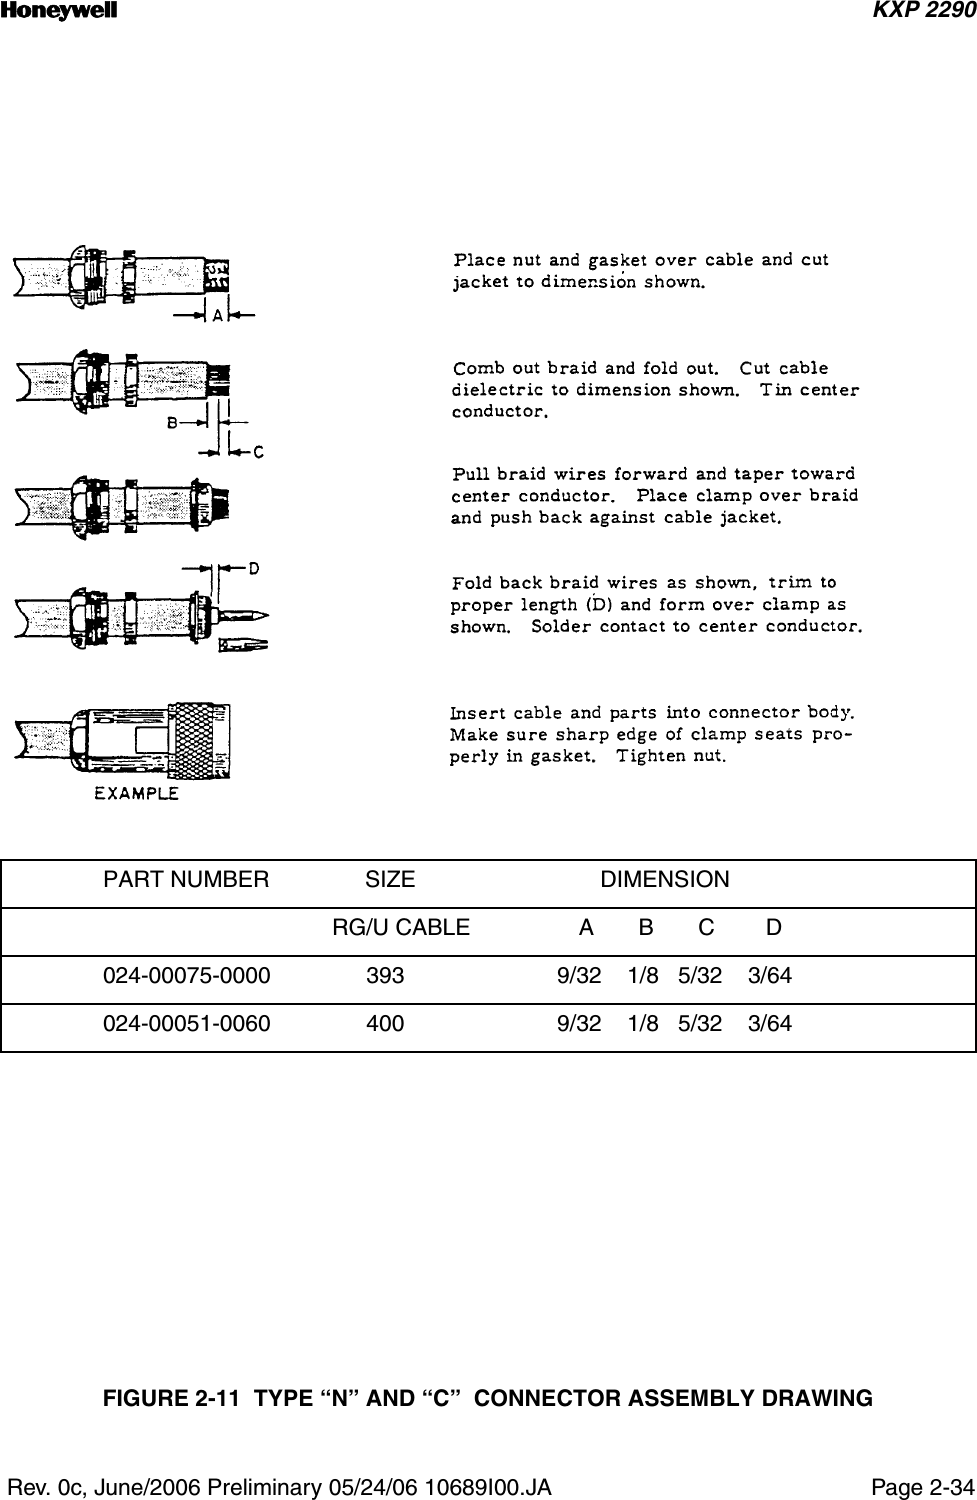 n KXP 2290 Rev. 0c, June/2006 Preliminary 05/24/06 10689I00.JA Page 2-34 FIGURE 2-11  TYPE “N” AND “C”  CONNECTOR ASSEMBLY DRAWINGPART NUMBER               SIZE                             DIMENSION                                    RG/U CABLE                 A       B       C        D024-00075-0000               393                        9/32    1/8   5/32    3/64024-00051-0060               400                        9/32    1/8   5/32    3/64